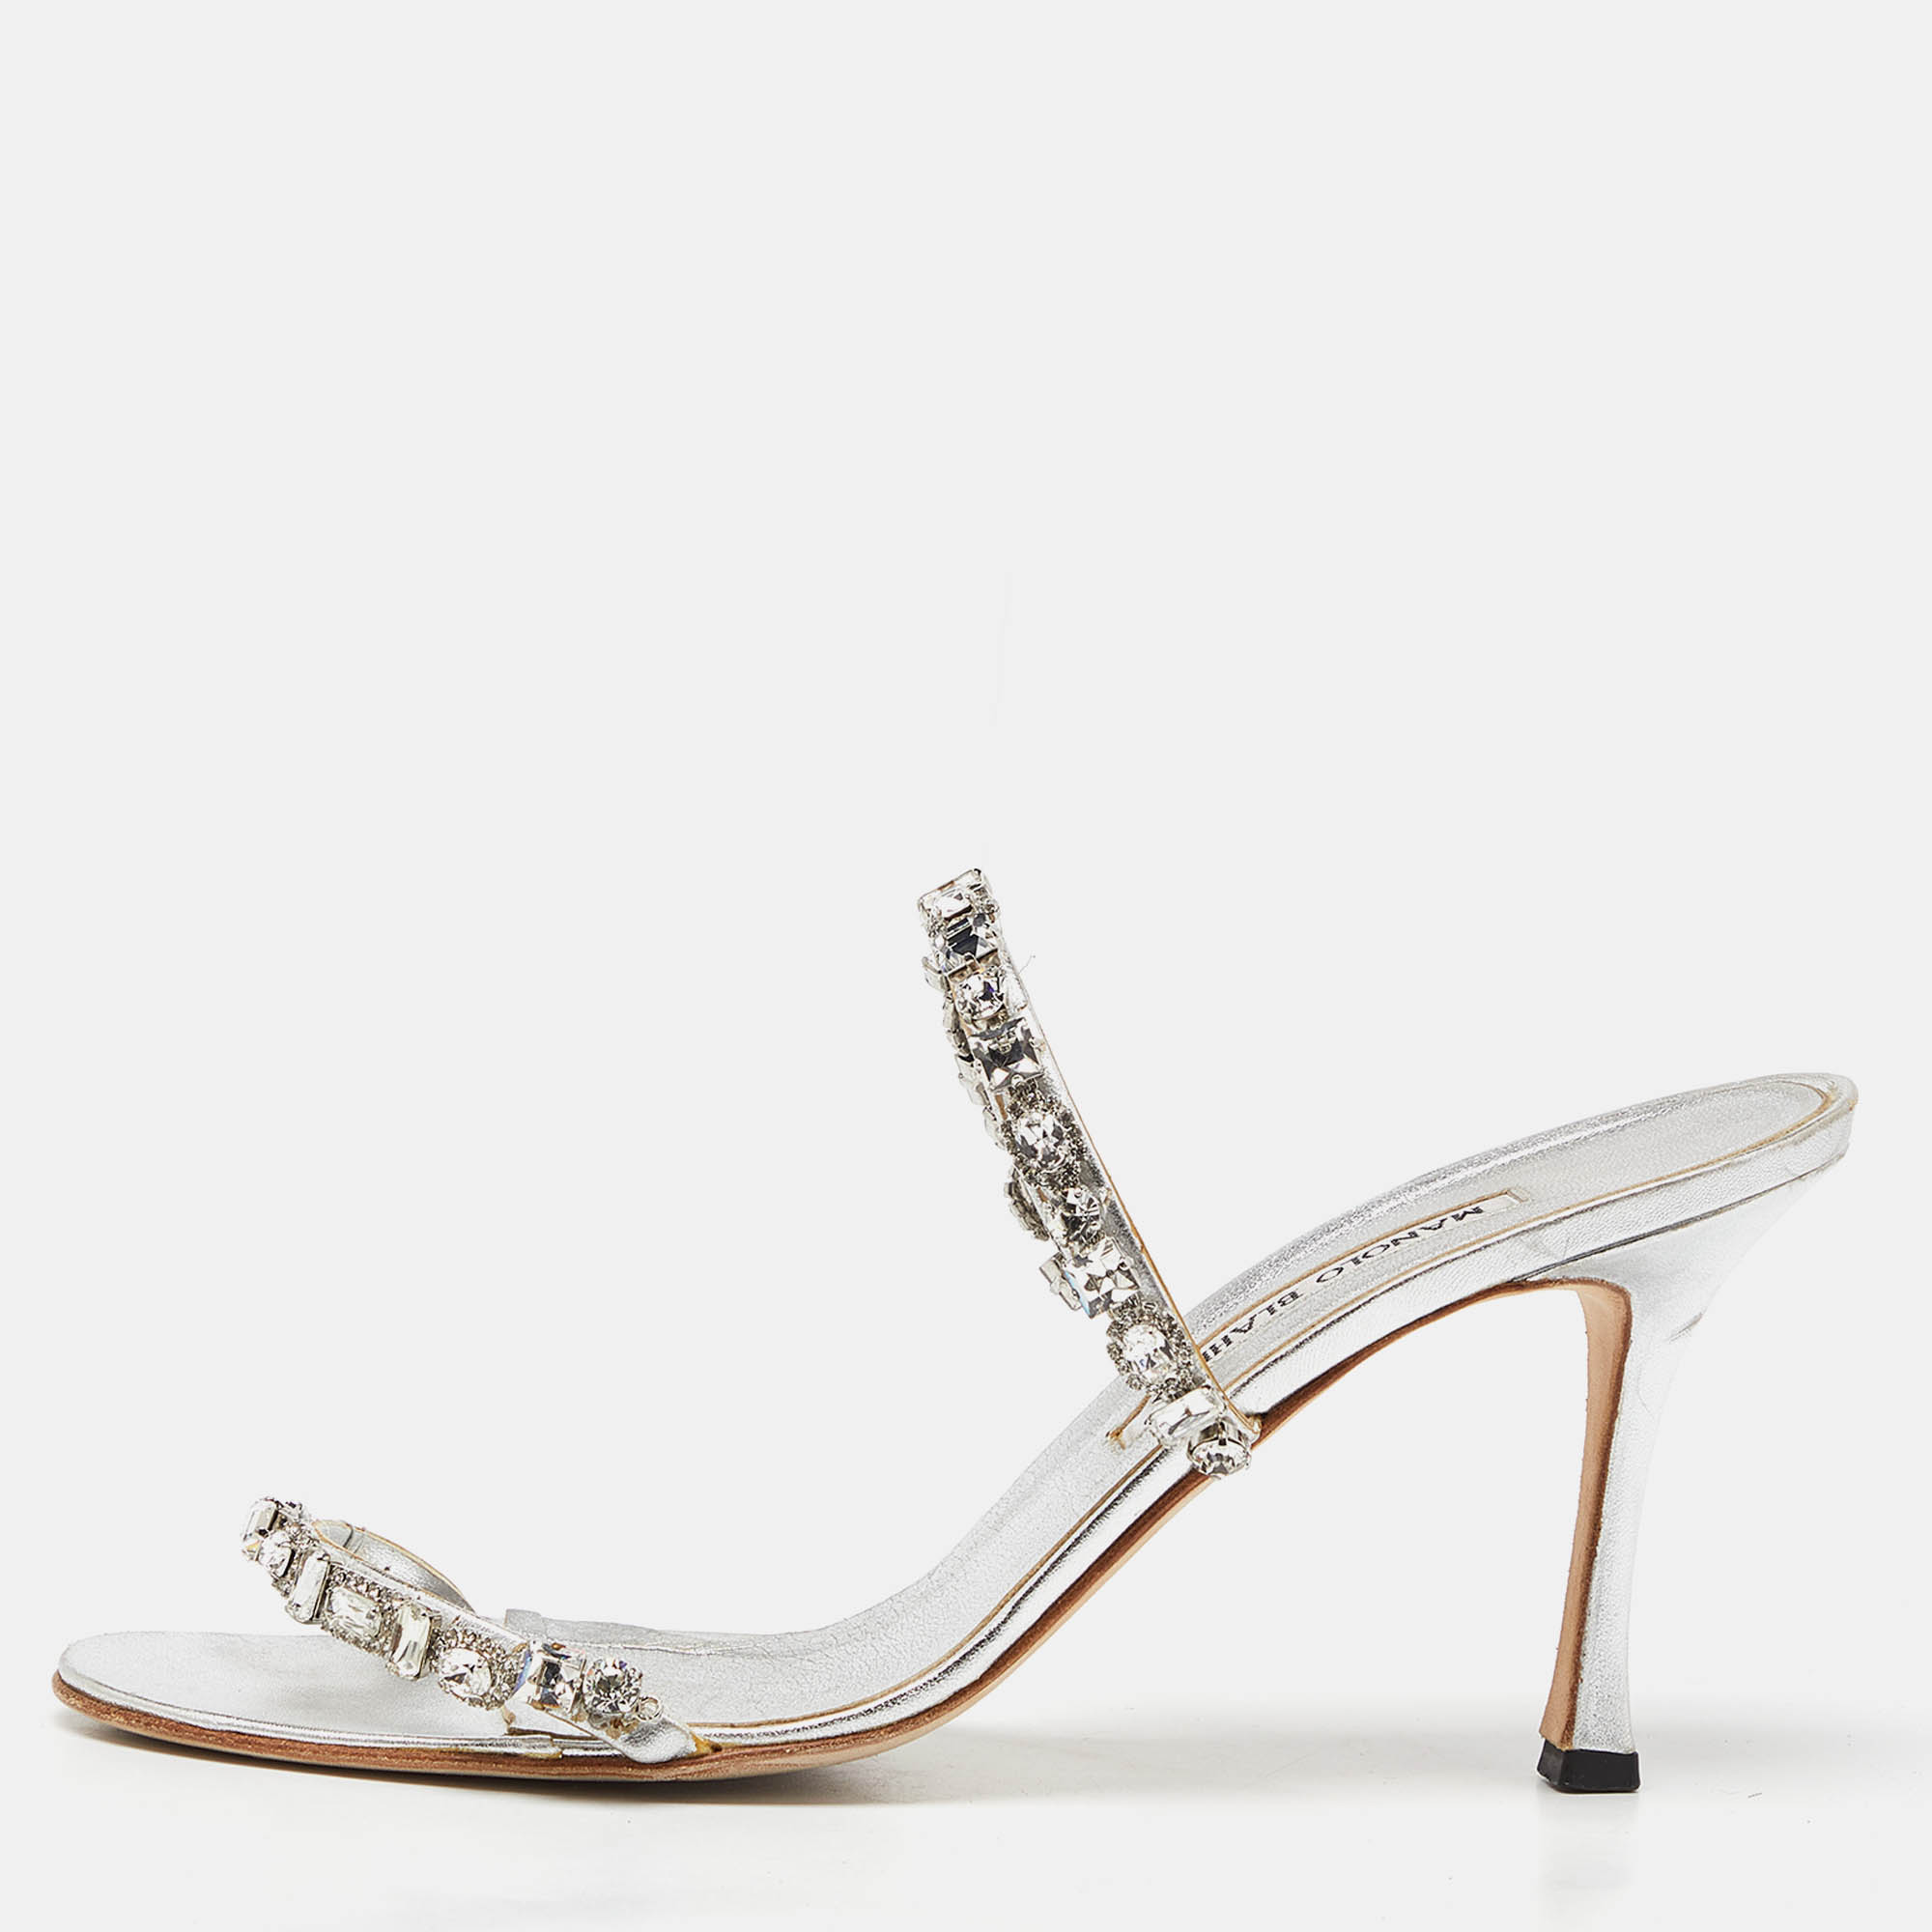 Pre-owned Manolo Blahnik Silver Leather Diora Slide Sandals Size 39.5